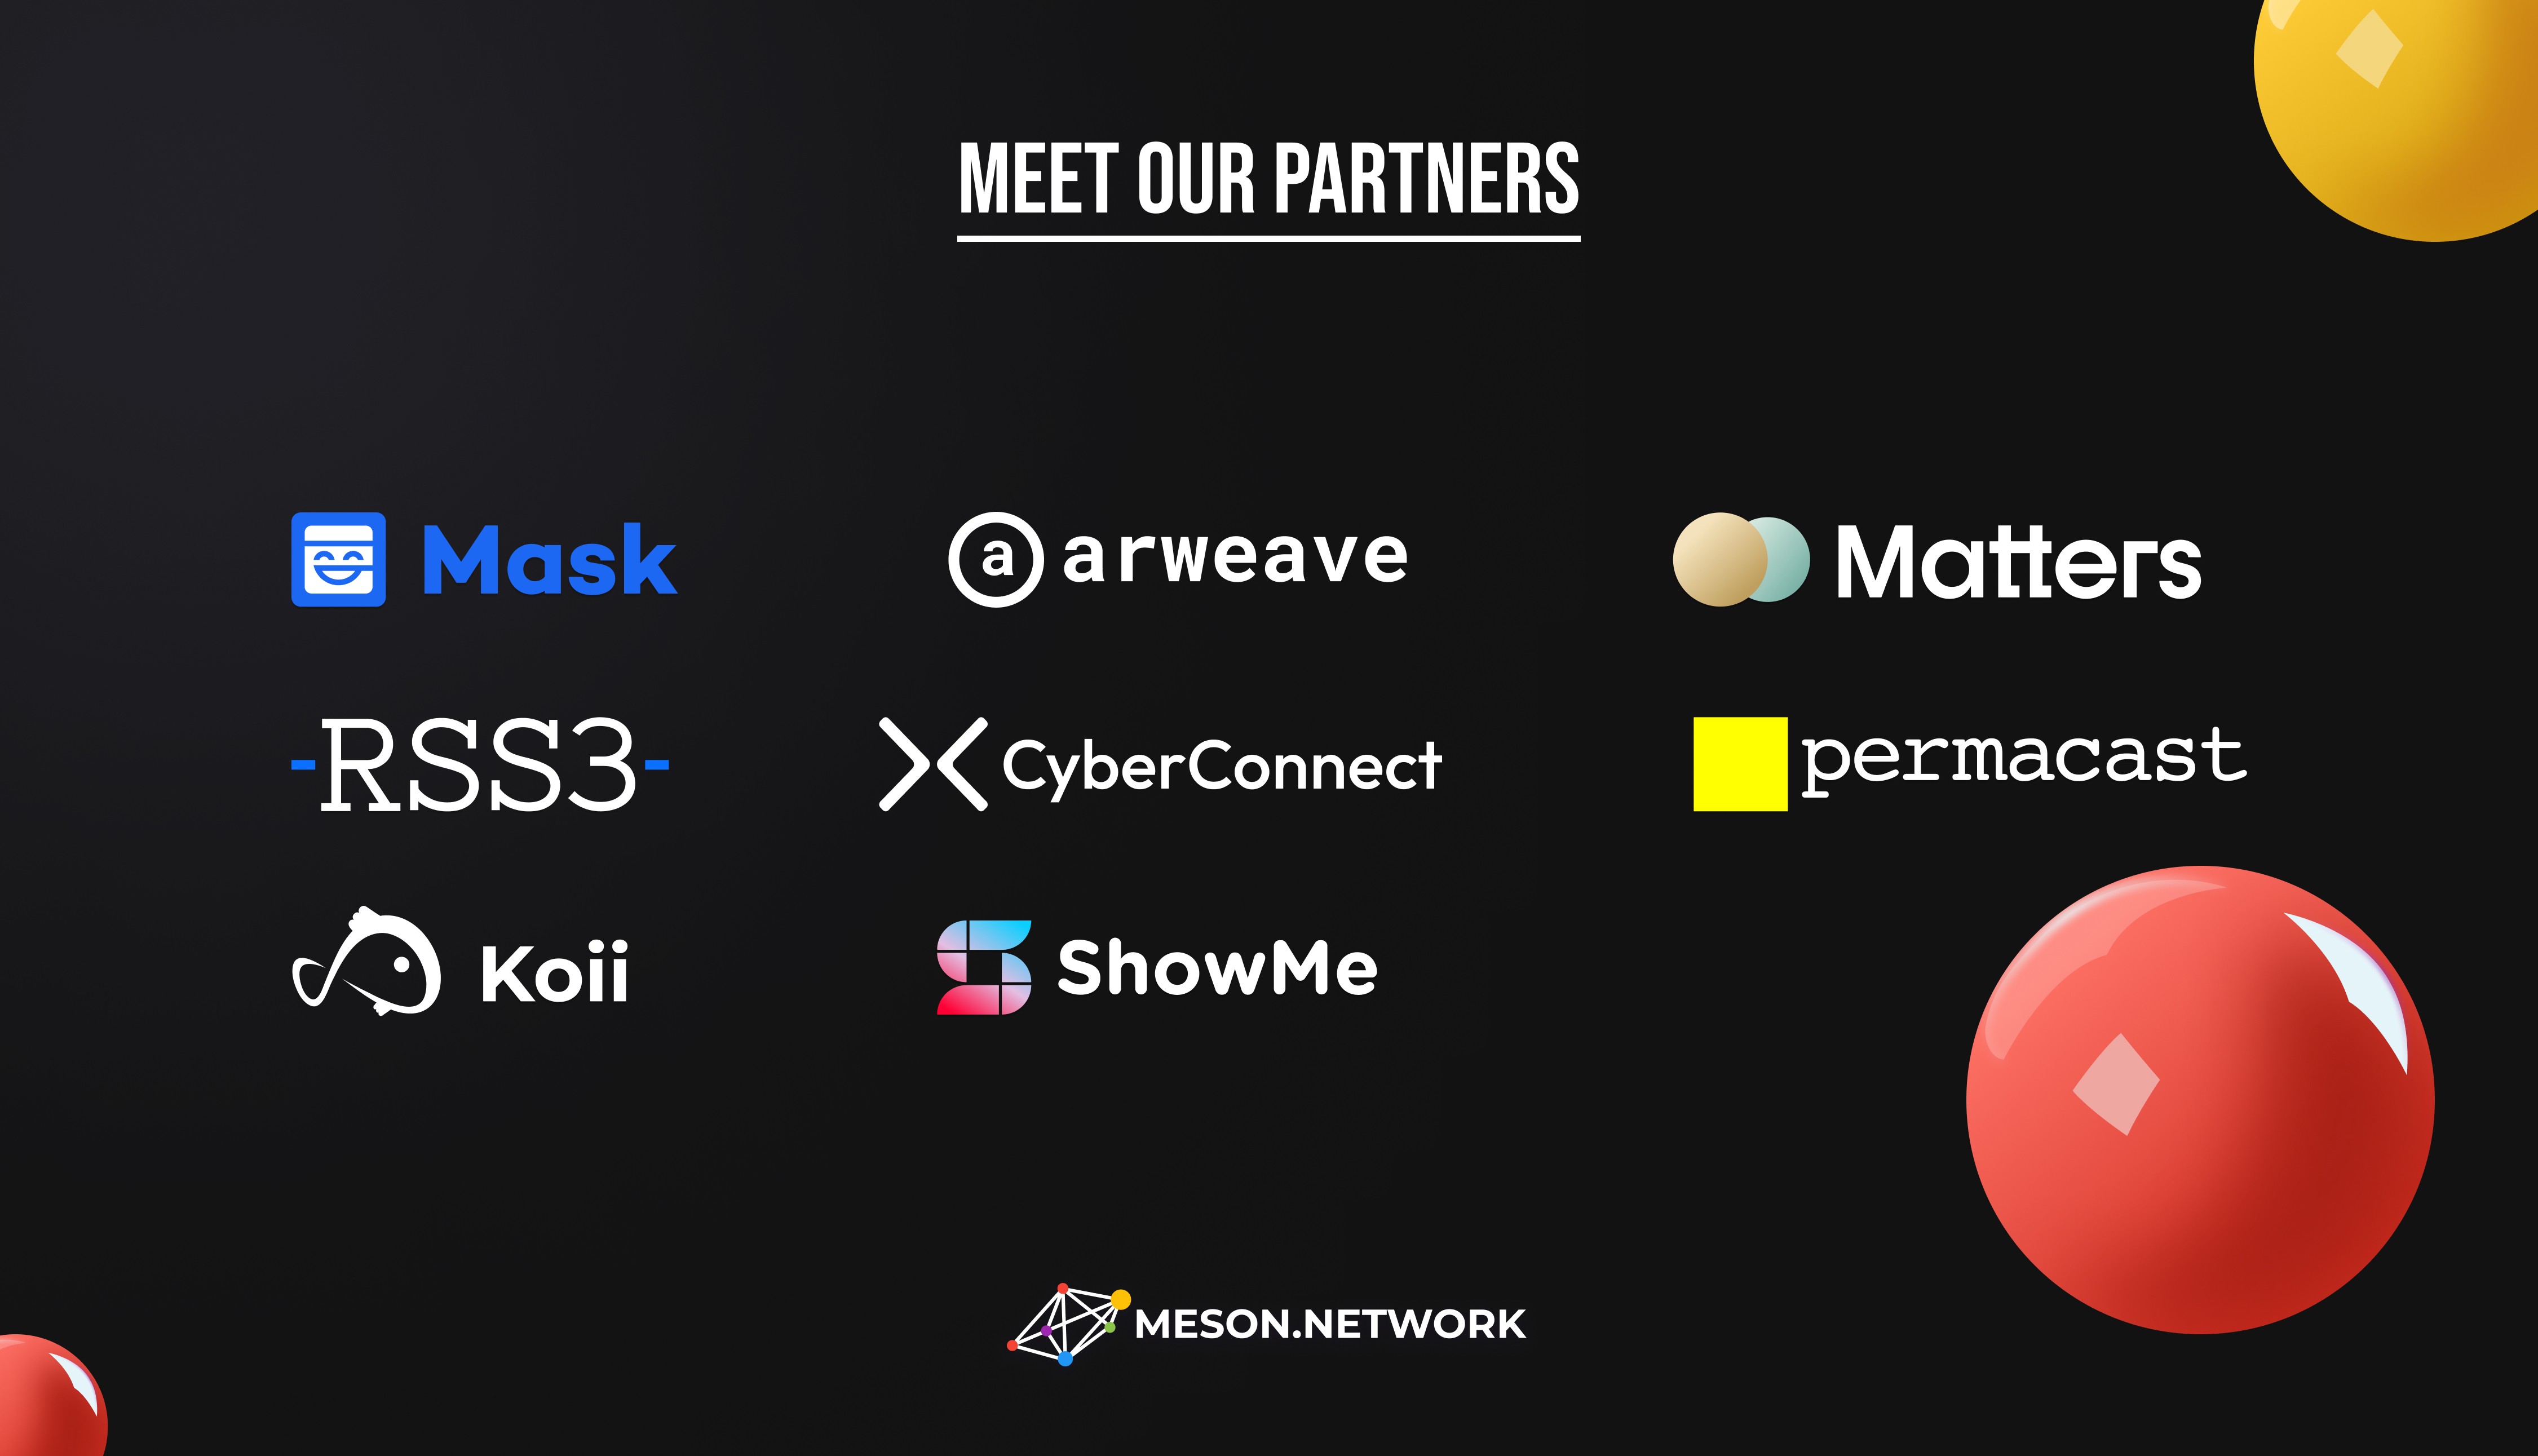 Meet Our Partners